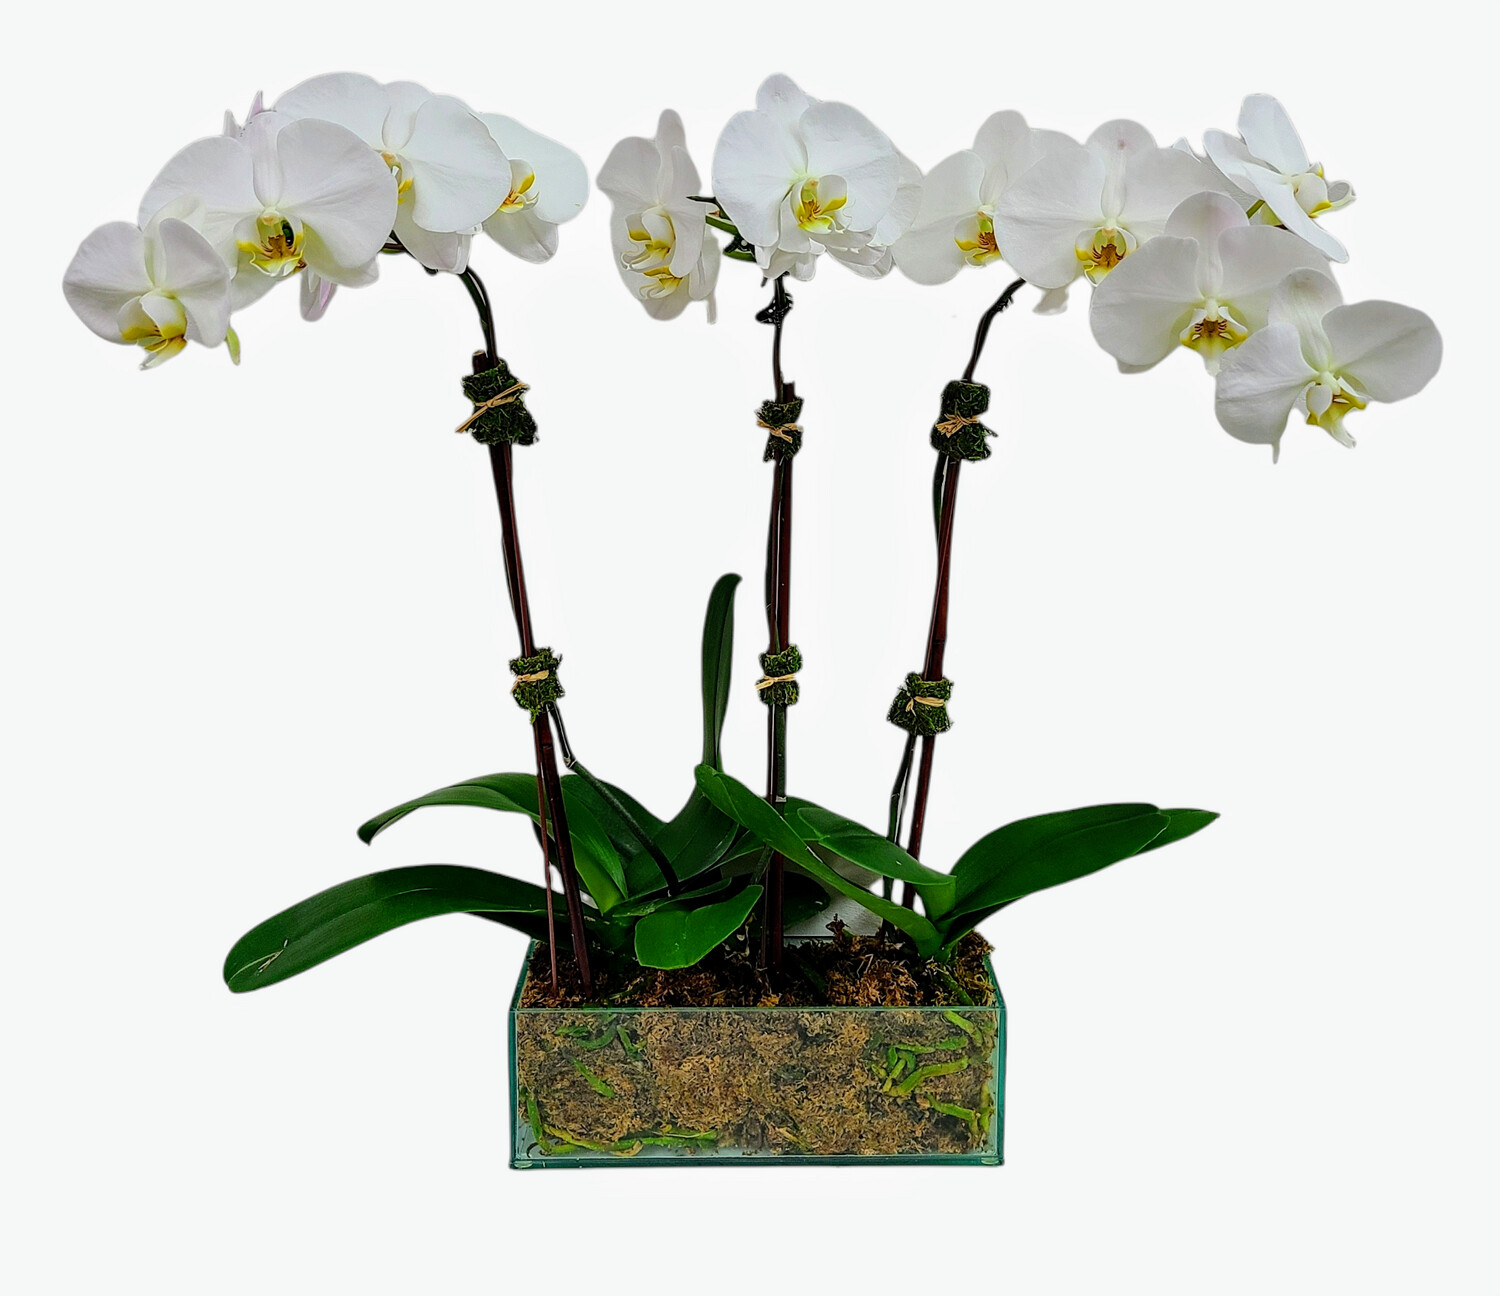 Nelly's Exquisite Orchids